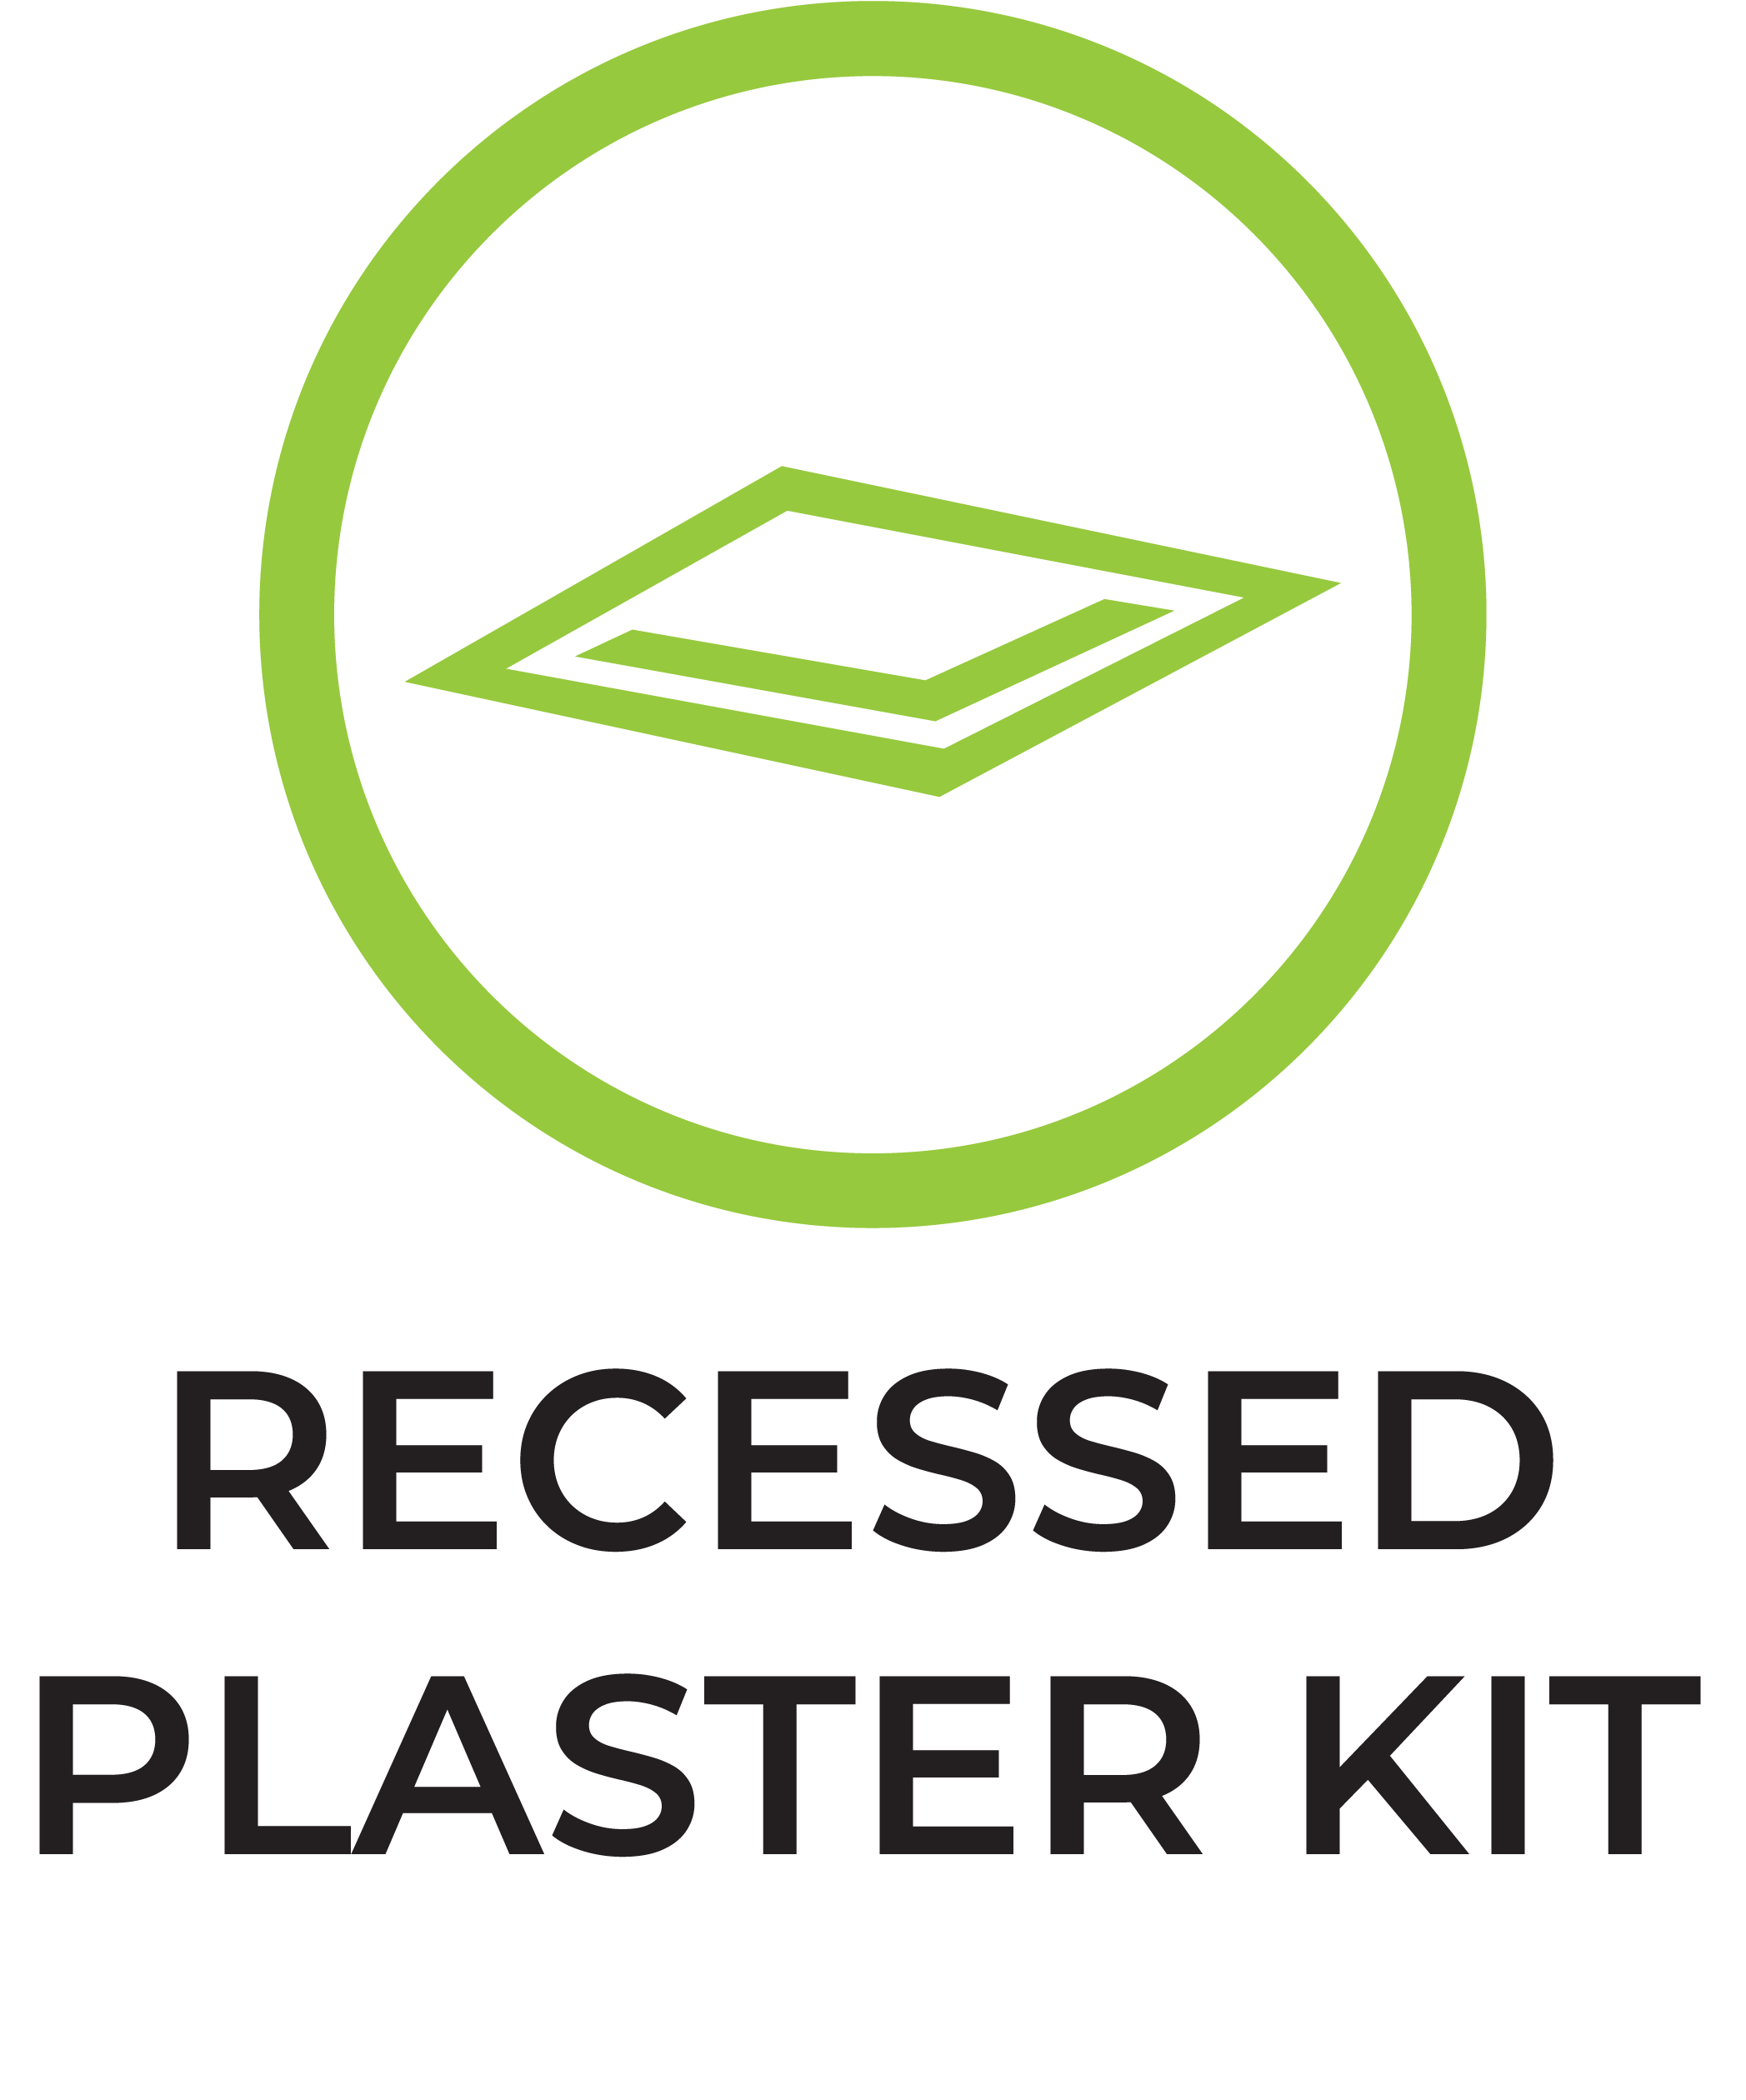 Recessed plater kit